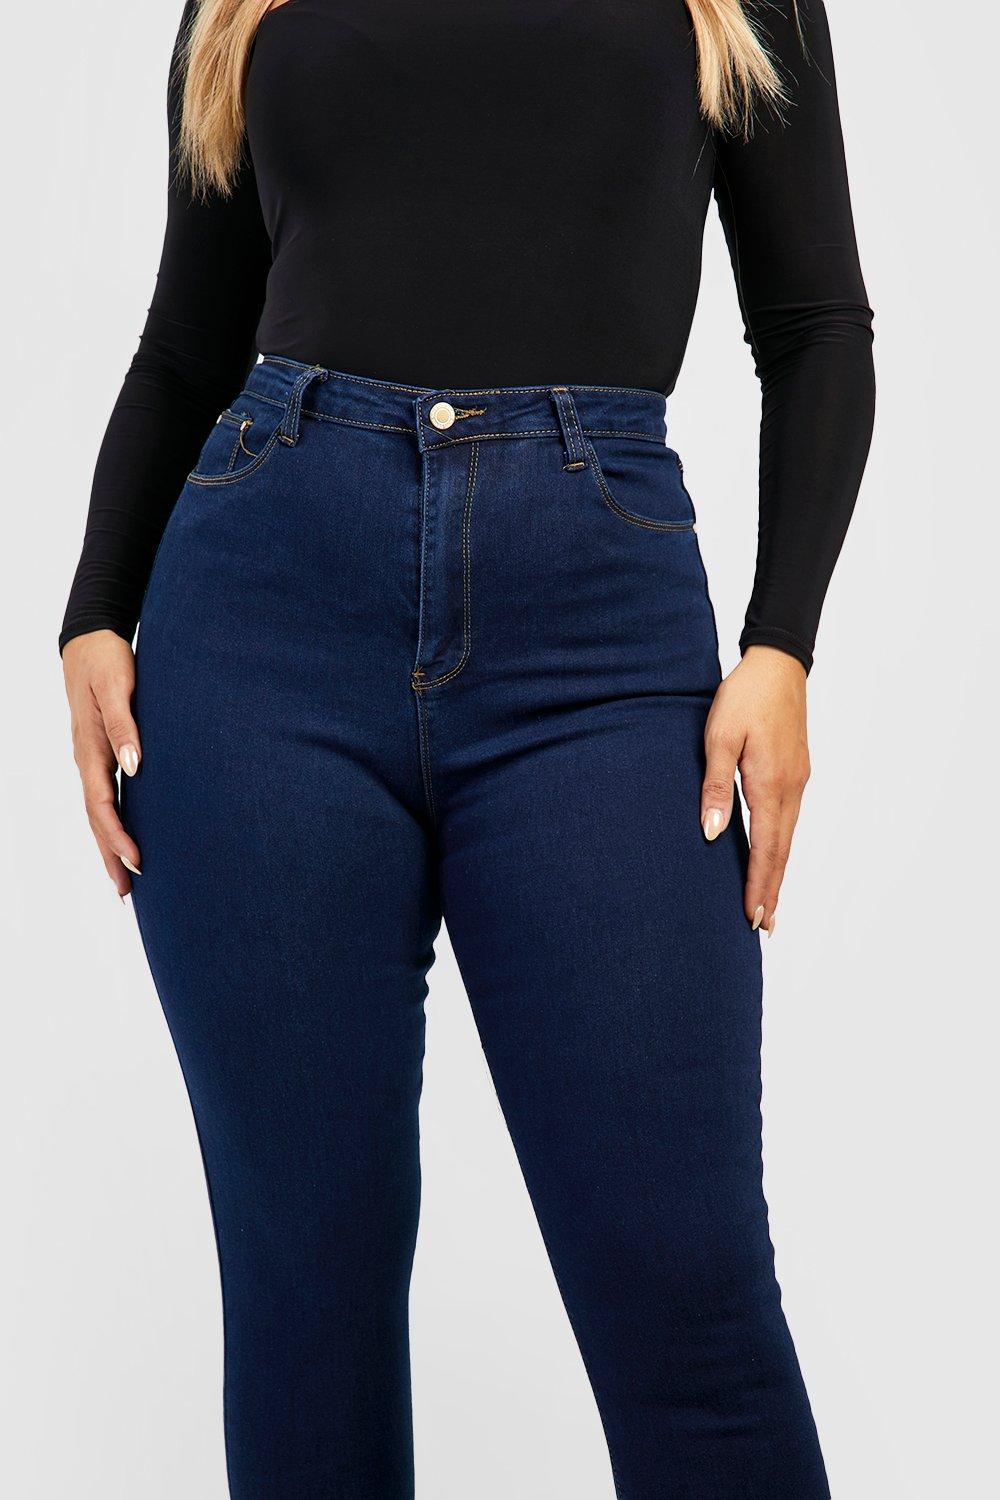 boohoo Tall Super High Waisted Power Stretch Skinny Jeans - Black - Size 4